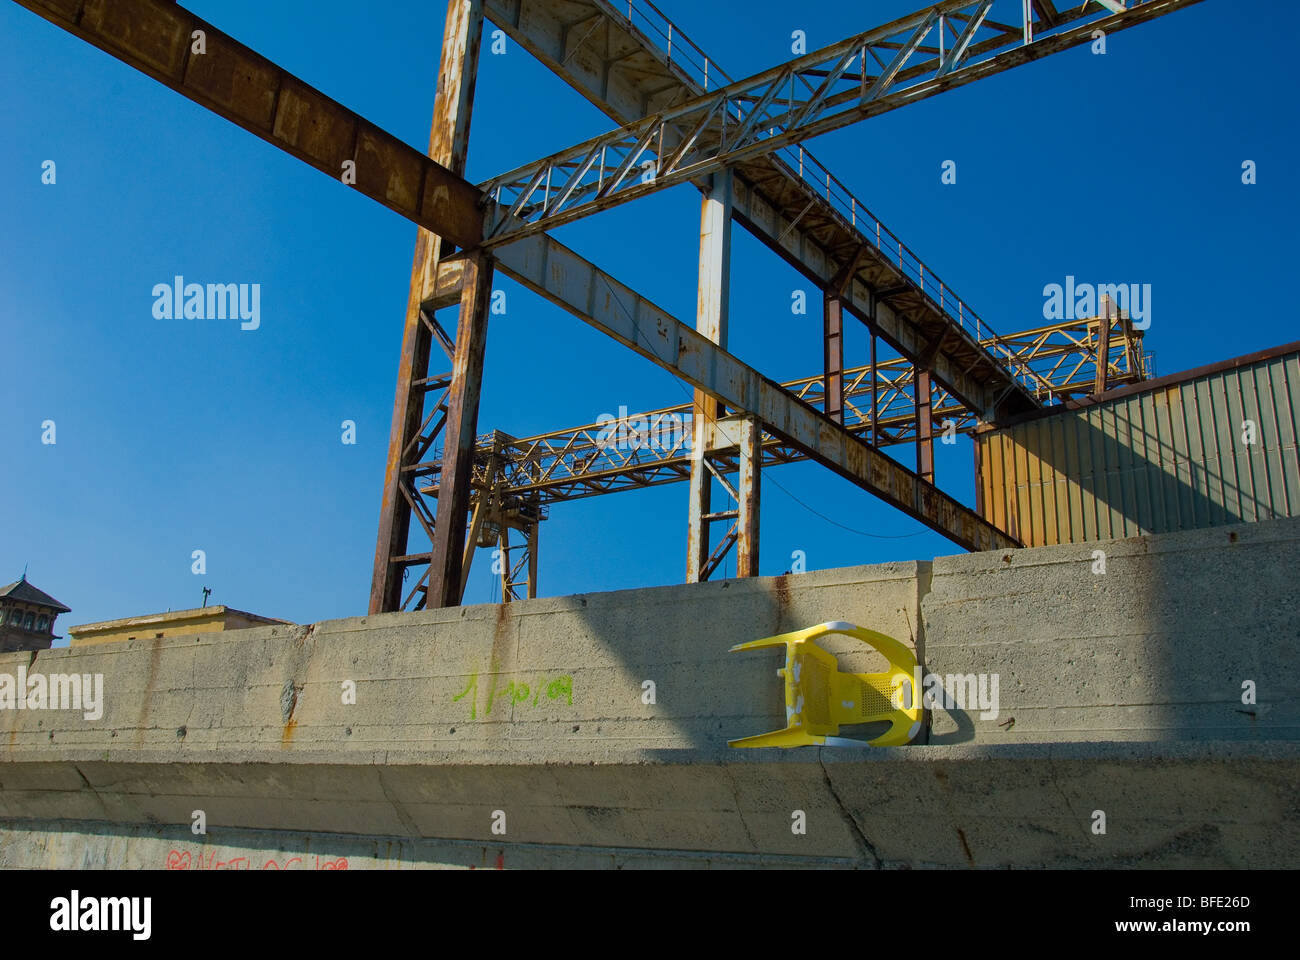 The steelwork of a crane in a disused boat yard in Savona Northern Italy Stock Photo